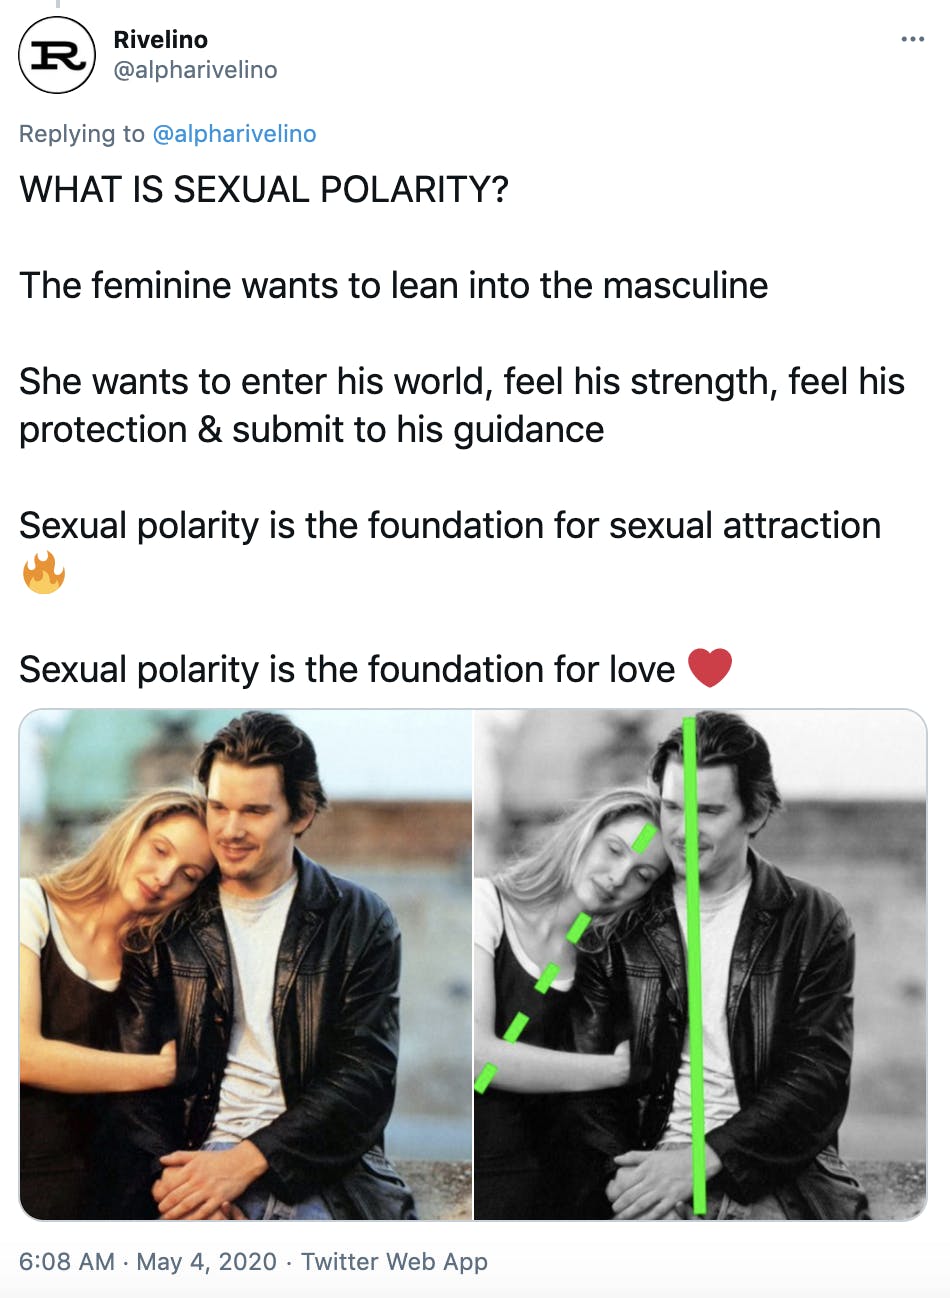 'WHAT IS SEXUAL POLARITY? The feminine wants to lean into the masculine She wants to enter his world, feel his strength, feel his protection & submit to his guidance Sexual polarity is the foundation for sexual attraction Fire Sexual polarity is the foundation for love Red heart' a photograph of a blonde white woman leaning her head on the shoulder of a leather jacket wearing white man. The same photograph in black and white with green lines highlighting their body angles